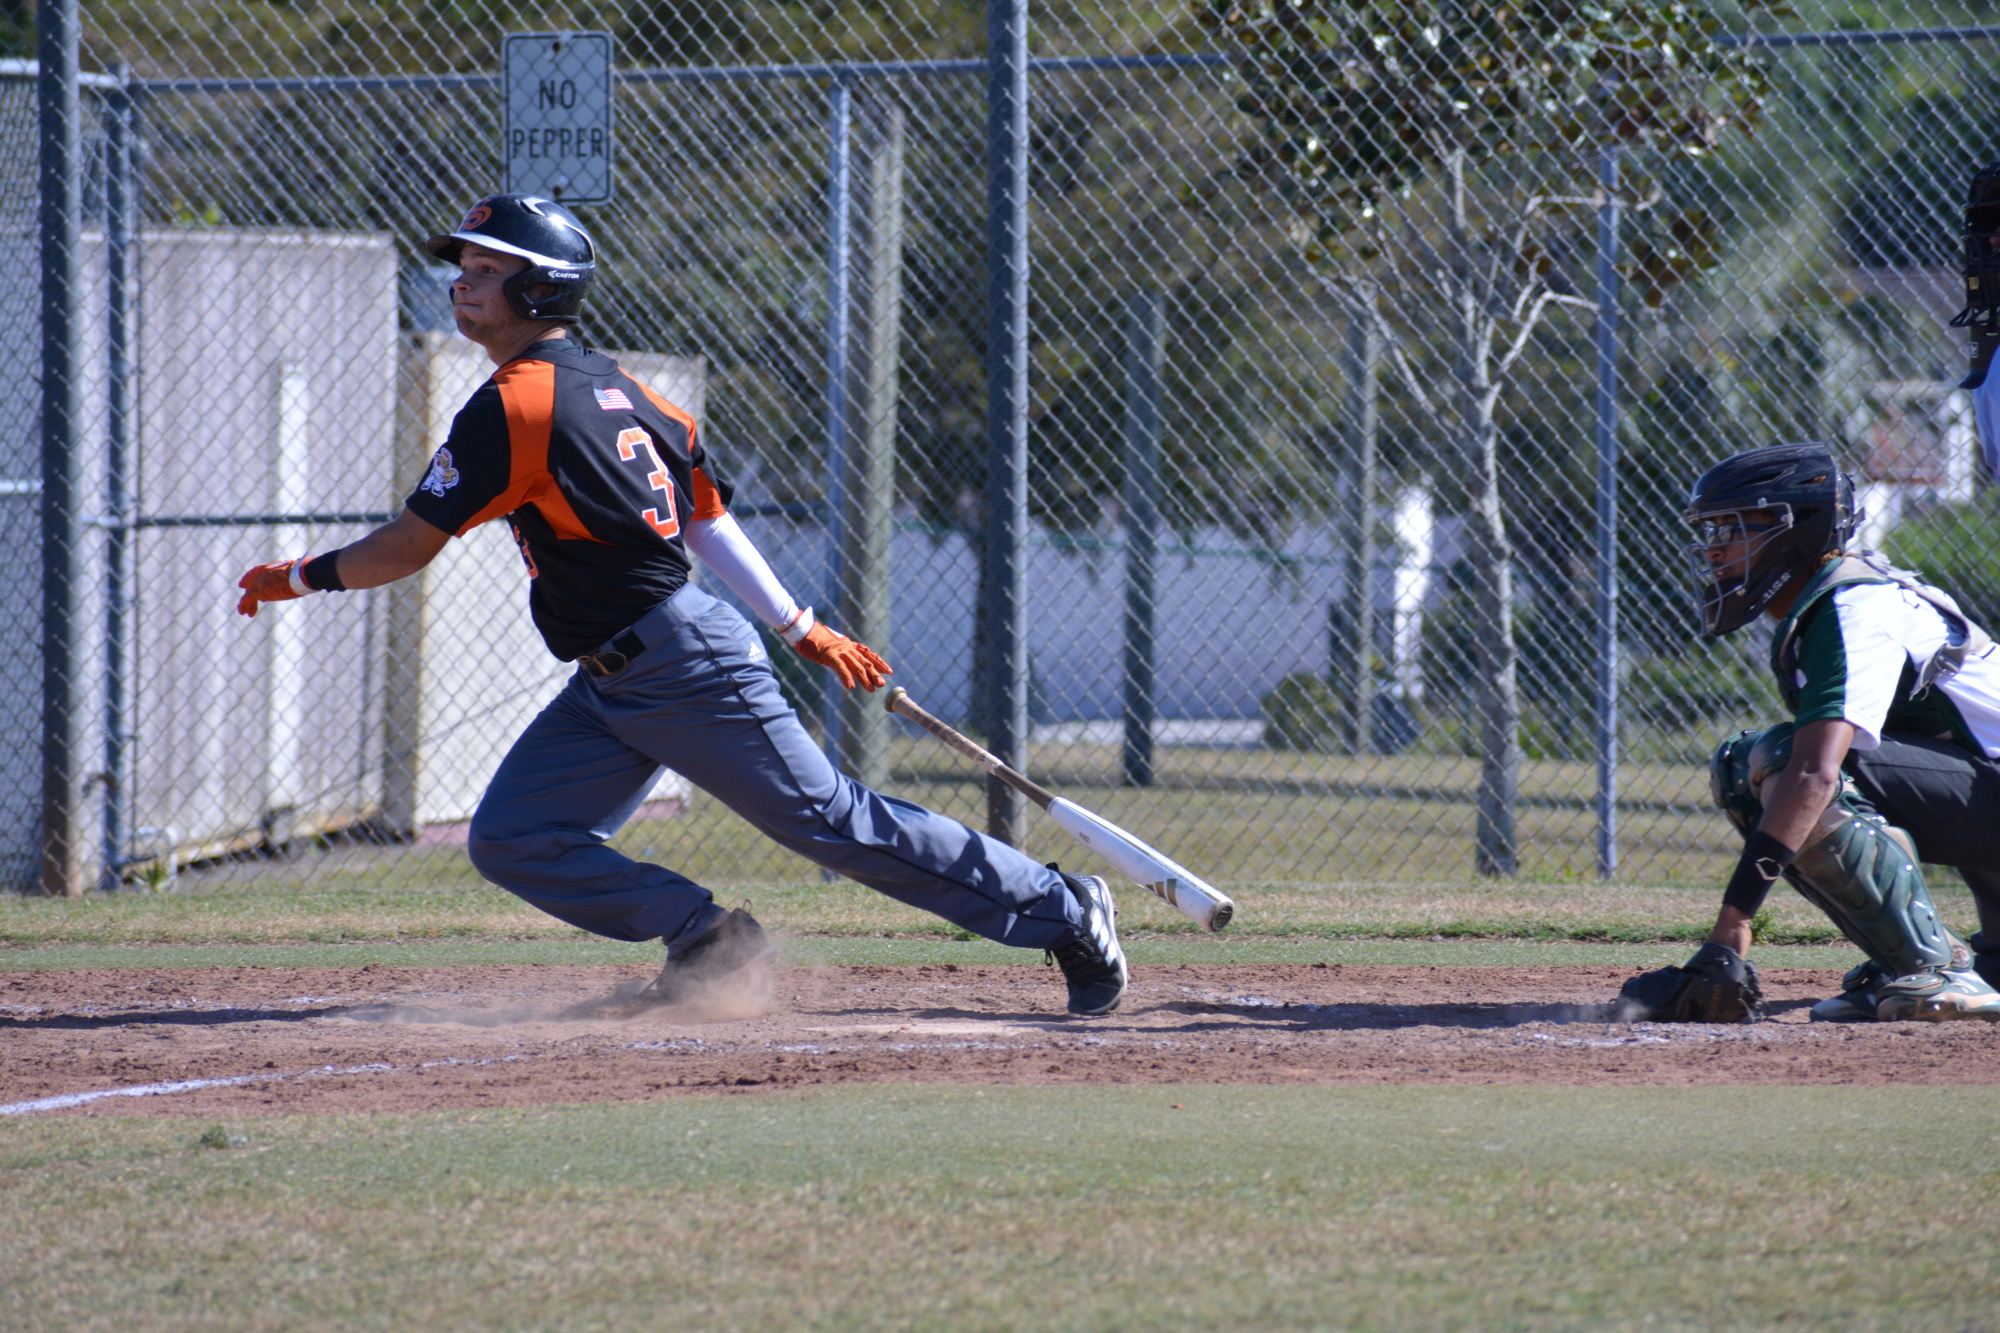 Sarasota High shortstop Nick Winkelmeyer slices a ball to the outfield against Saint Petersburg.